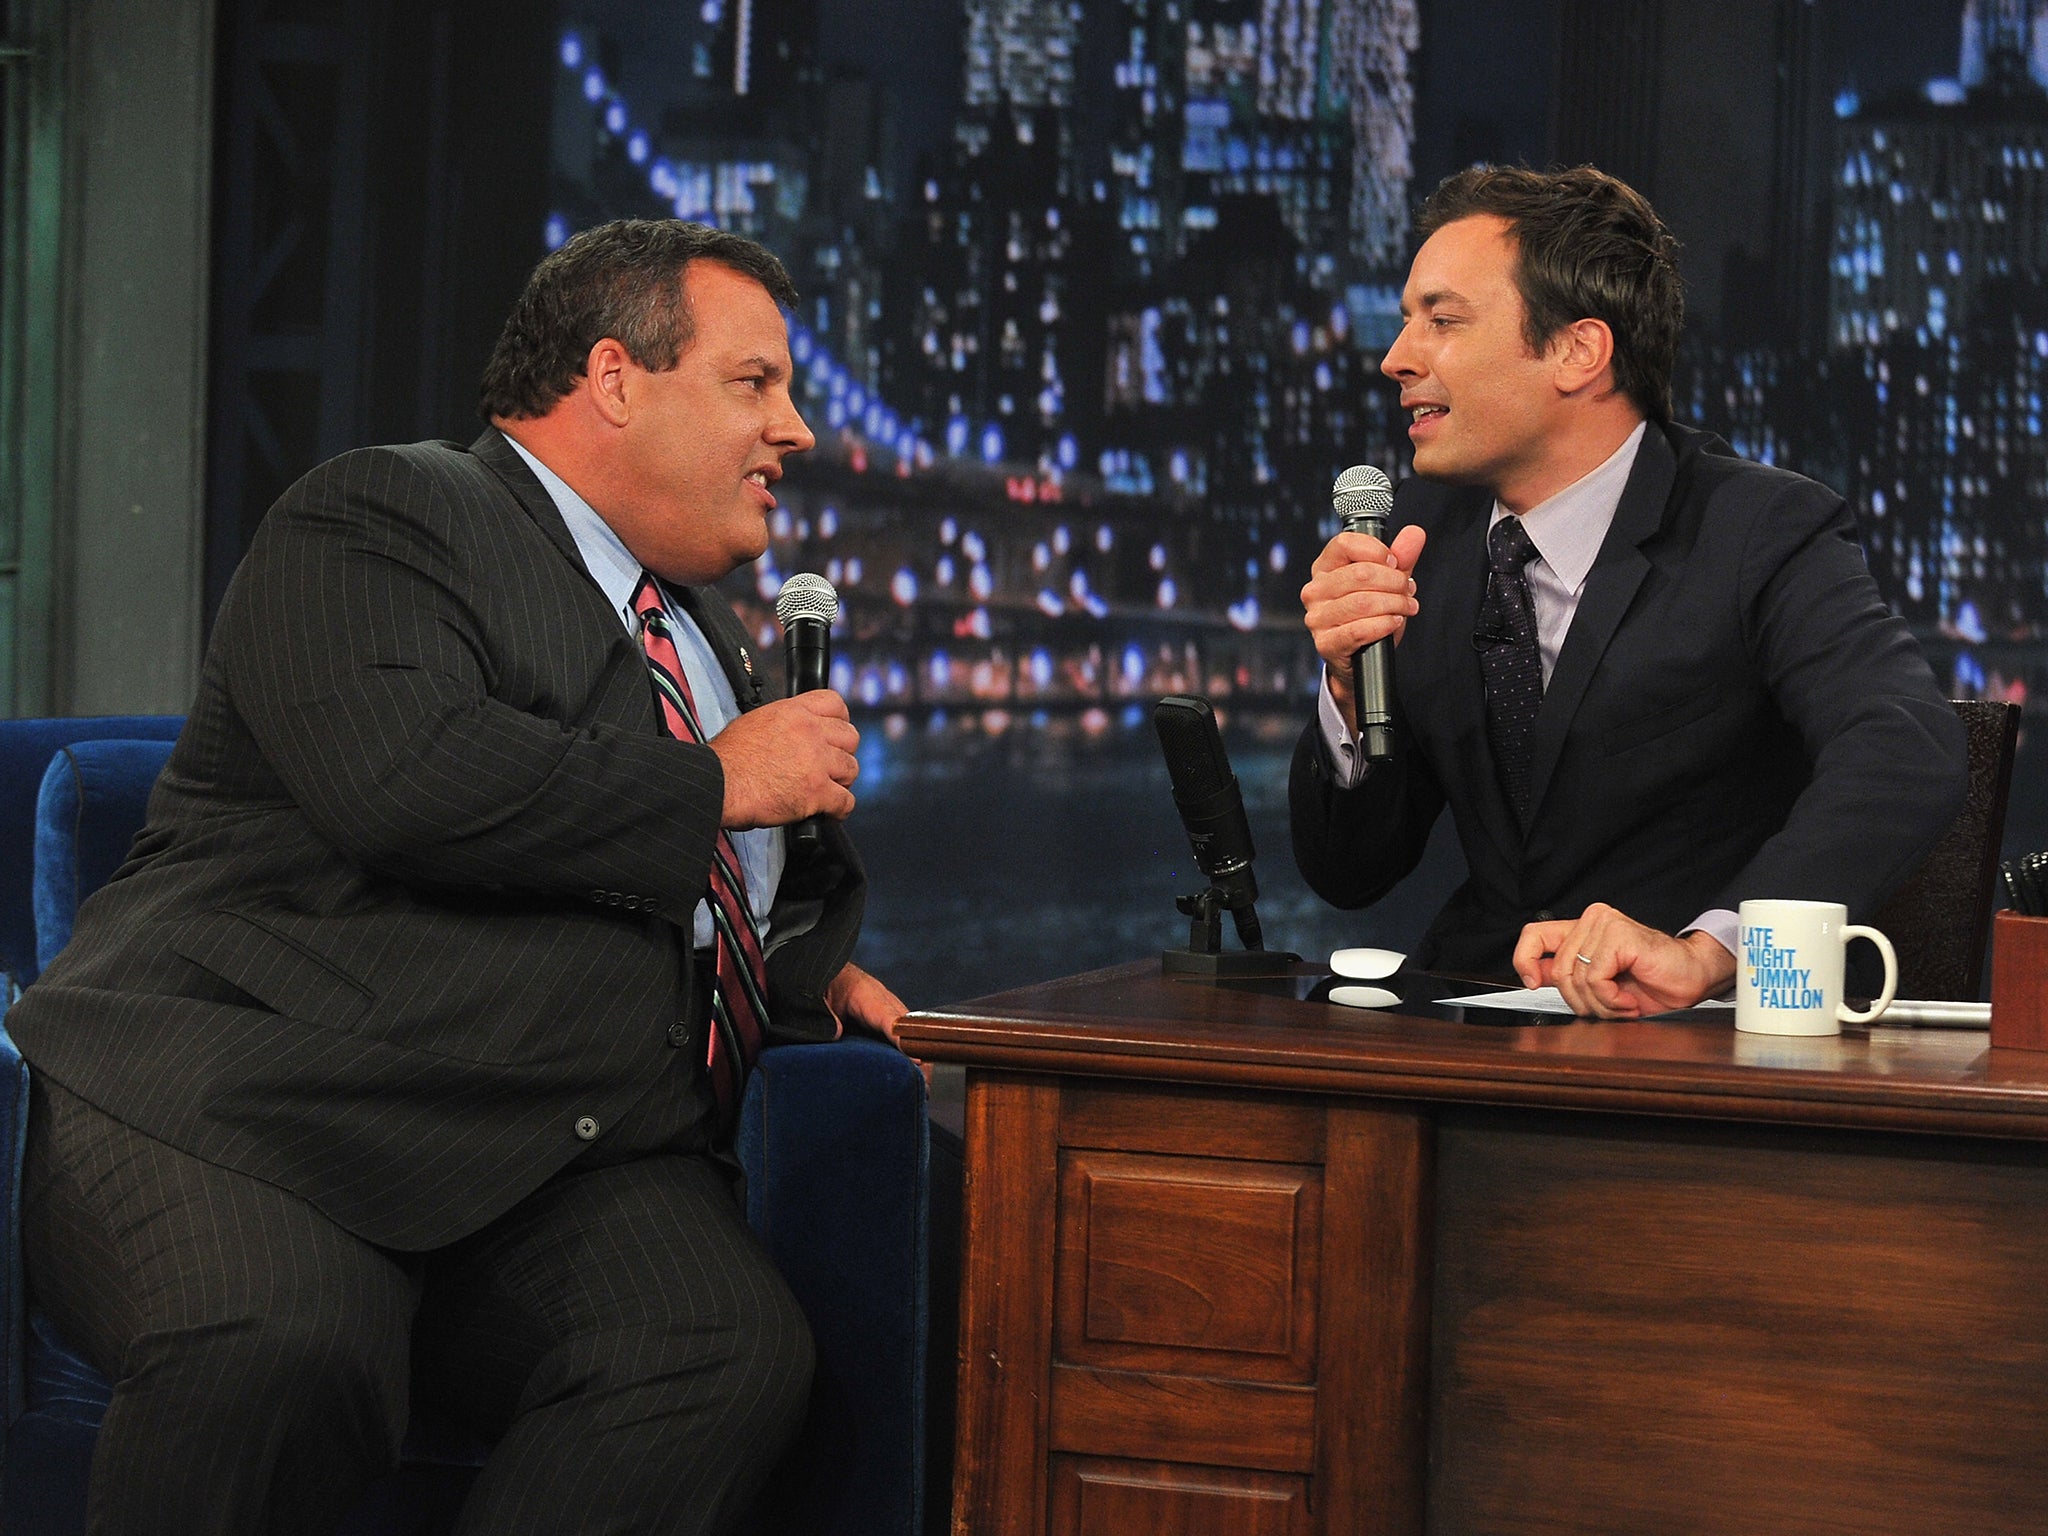 The pair have form: they sang a Bruce Springsteen duet together on 'Late Night With Jimmy Fallon' in September 2012